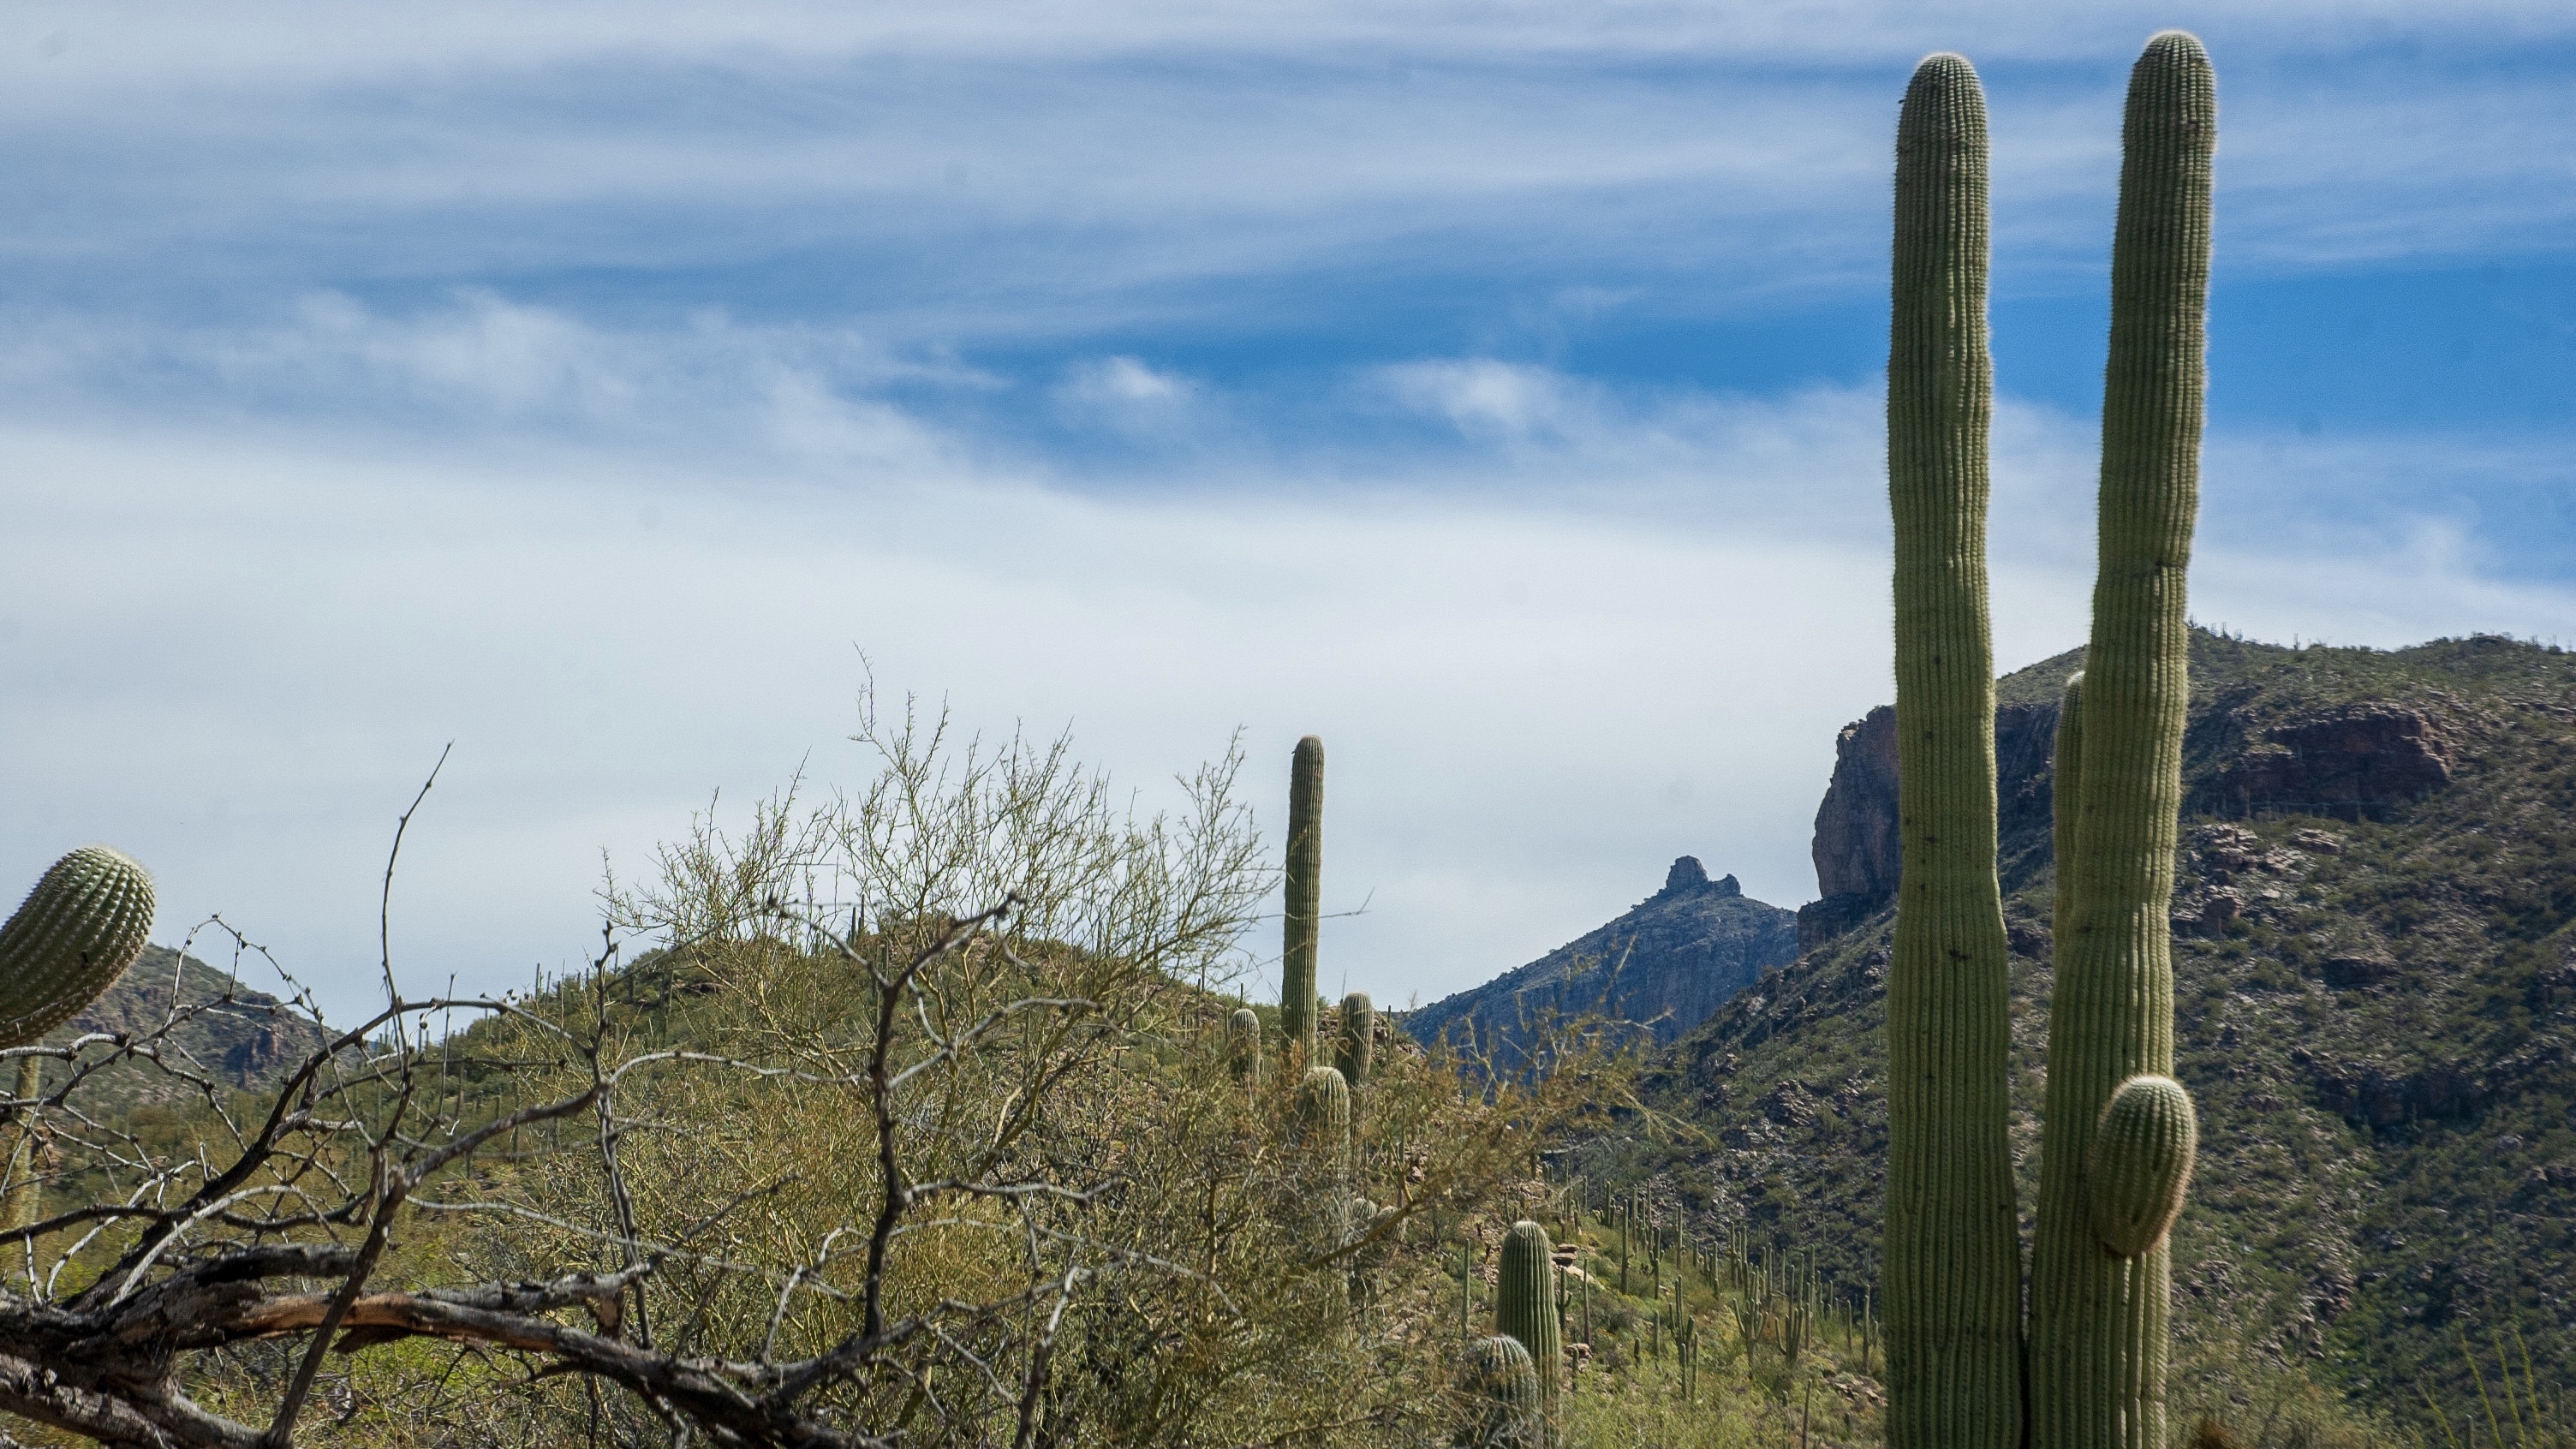 Another photo of the Tucson mountain landscape